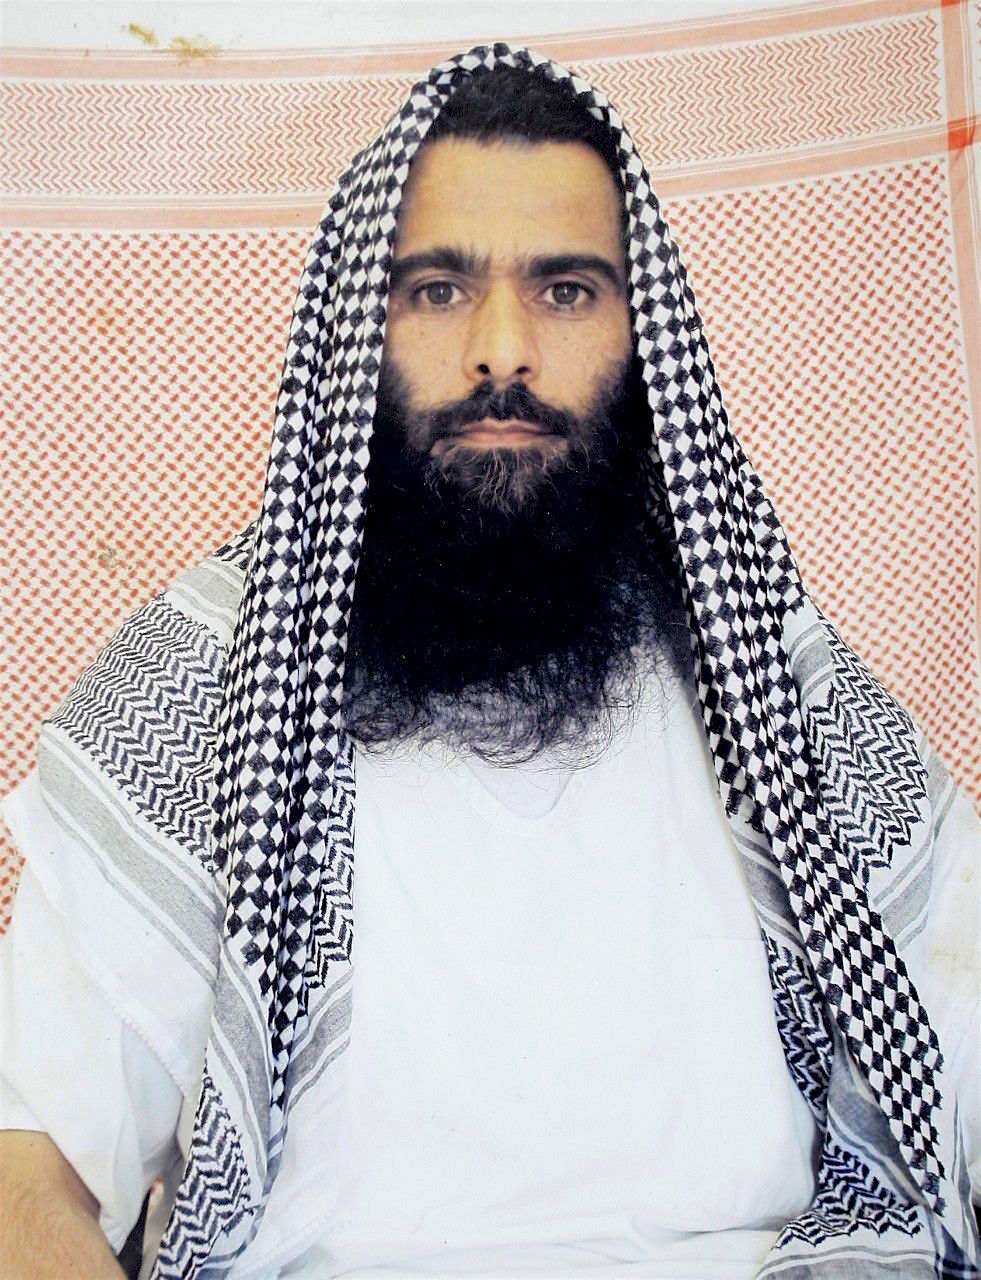 Mohammad Rahim, an Afghan prisoner at Guantanamo, regarded as a "high-value detainee," in photo taken by representatives of the International Committee of the Red Cross, who made it available to his family, who, in turn, made it publicly available.